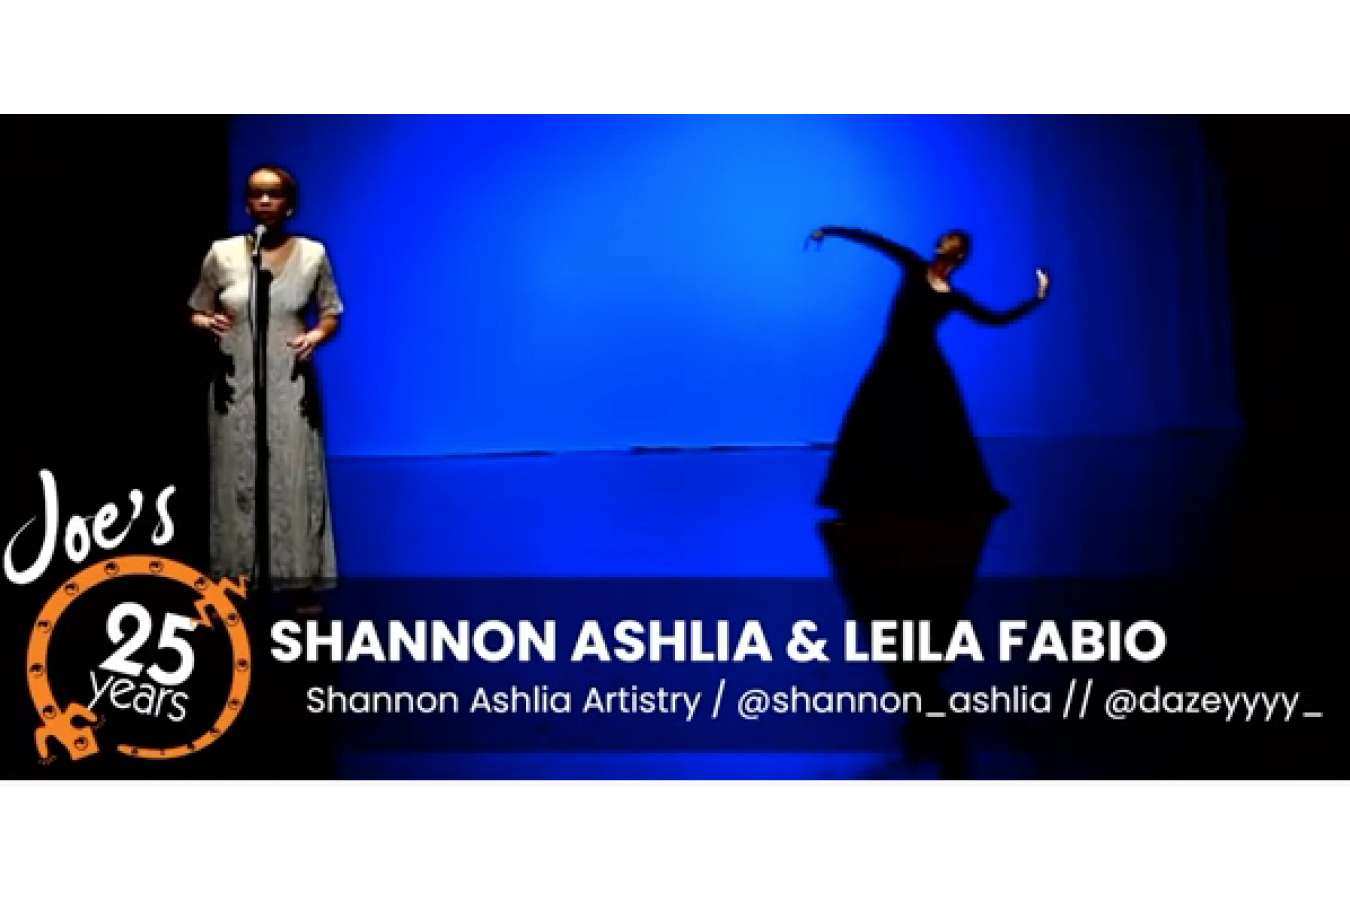 3 Shannon : Original performances inspired by and relevant to the unprecedented moment being experienced by the community, were live-streamed free to all registrants.